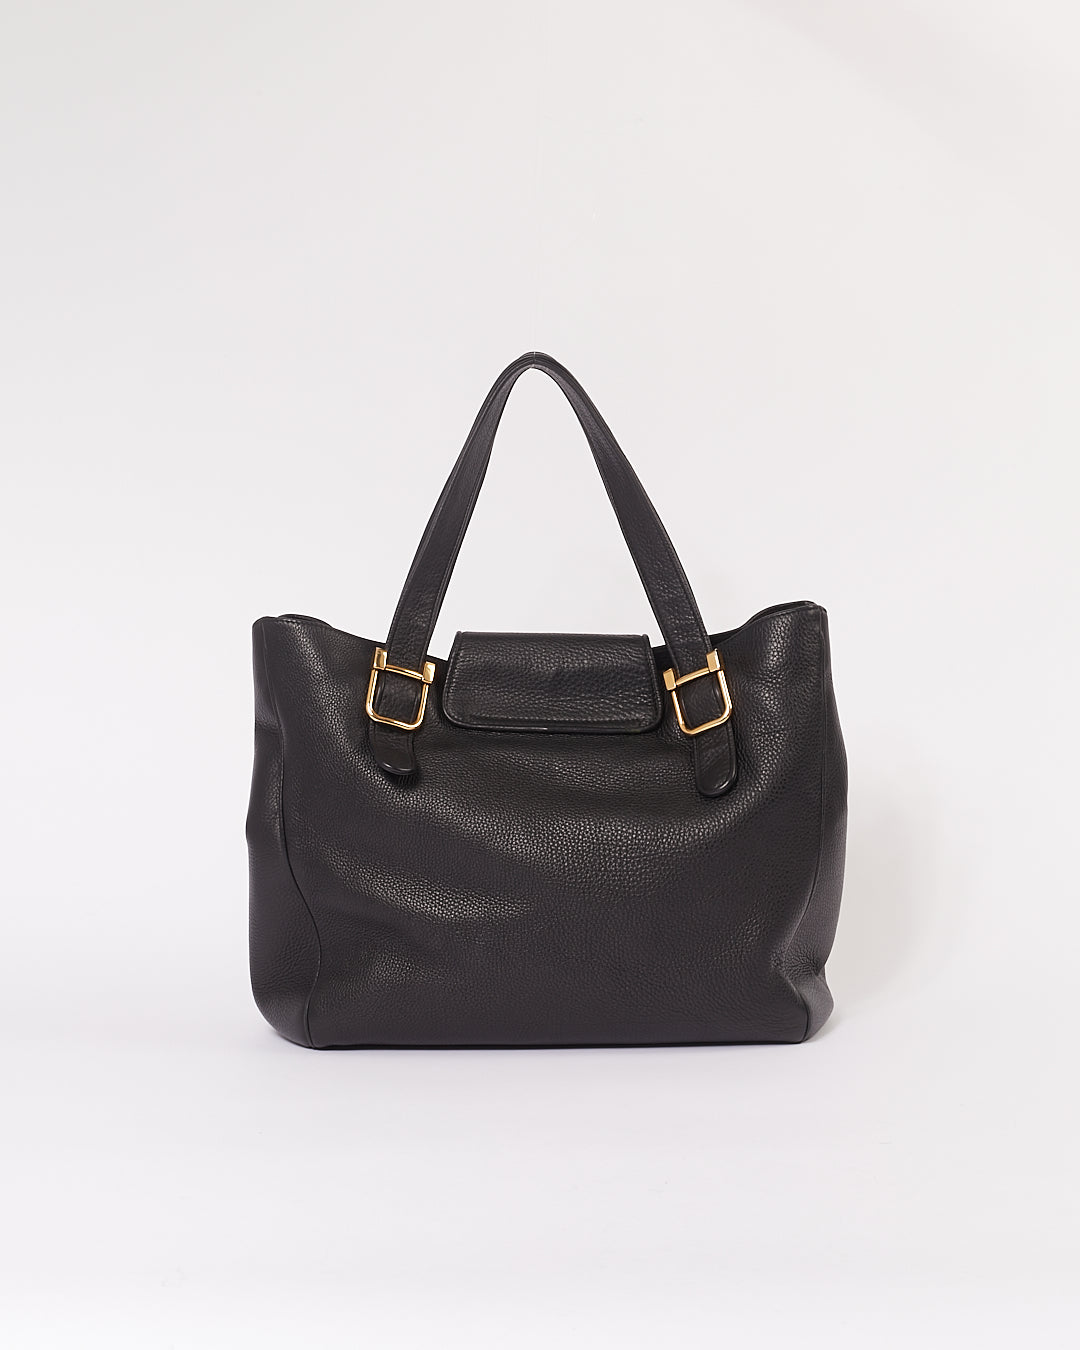 Gucci Black Pebbled Leather Tote Bag